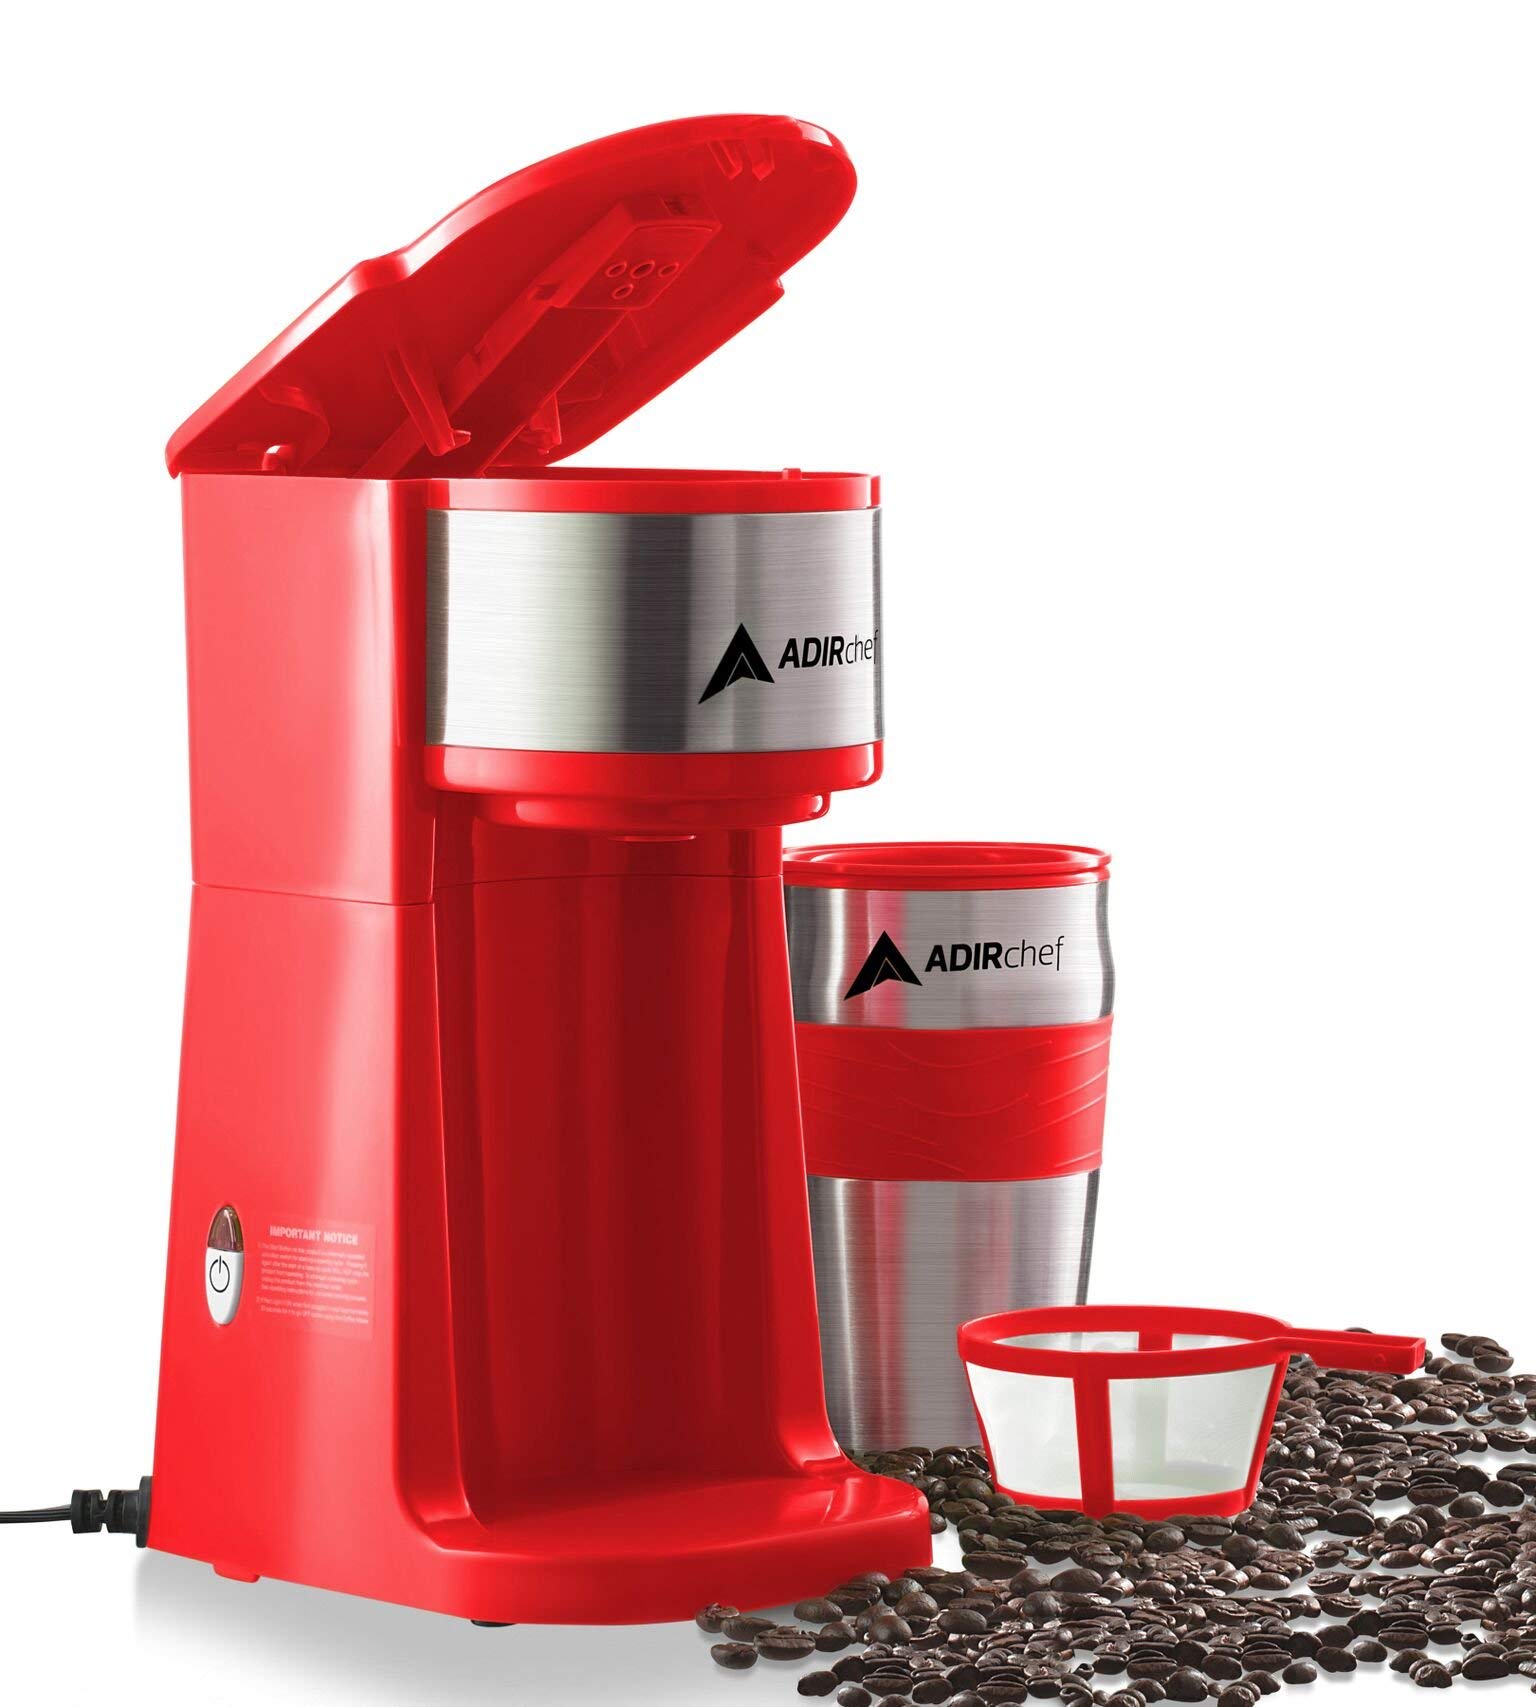 AdirChef Single Serve Mini Travel Coffee Maker & 15 oz. Travel Mug Coffee Tumbler & Reusable Filter for Home, Office, Camping, Portable Small and Compact (Red)  - Acceptable